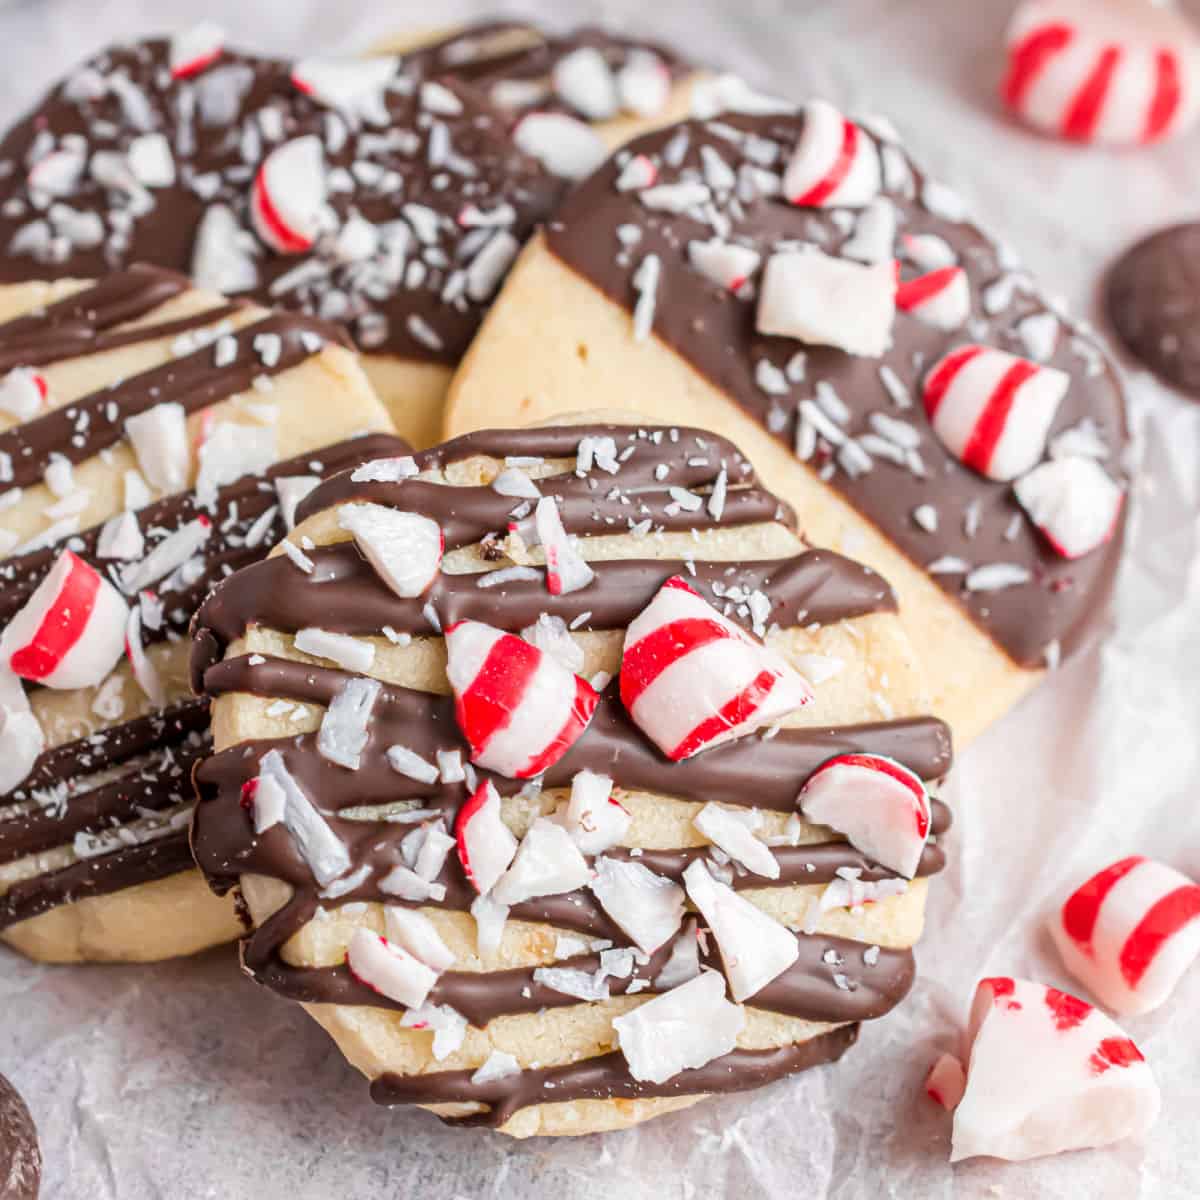 Turn a simple shortbread cookie into a holiday delight! This Chocolate Peppermint Shortbread recipe features a buttery cookie dipped in melted dark chocolate and sprinkled with crushed peppermints. Make a batch of these for Christmas and watch them disappear!